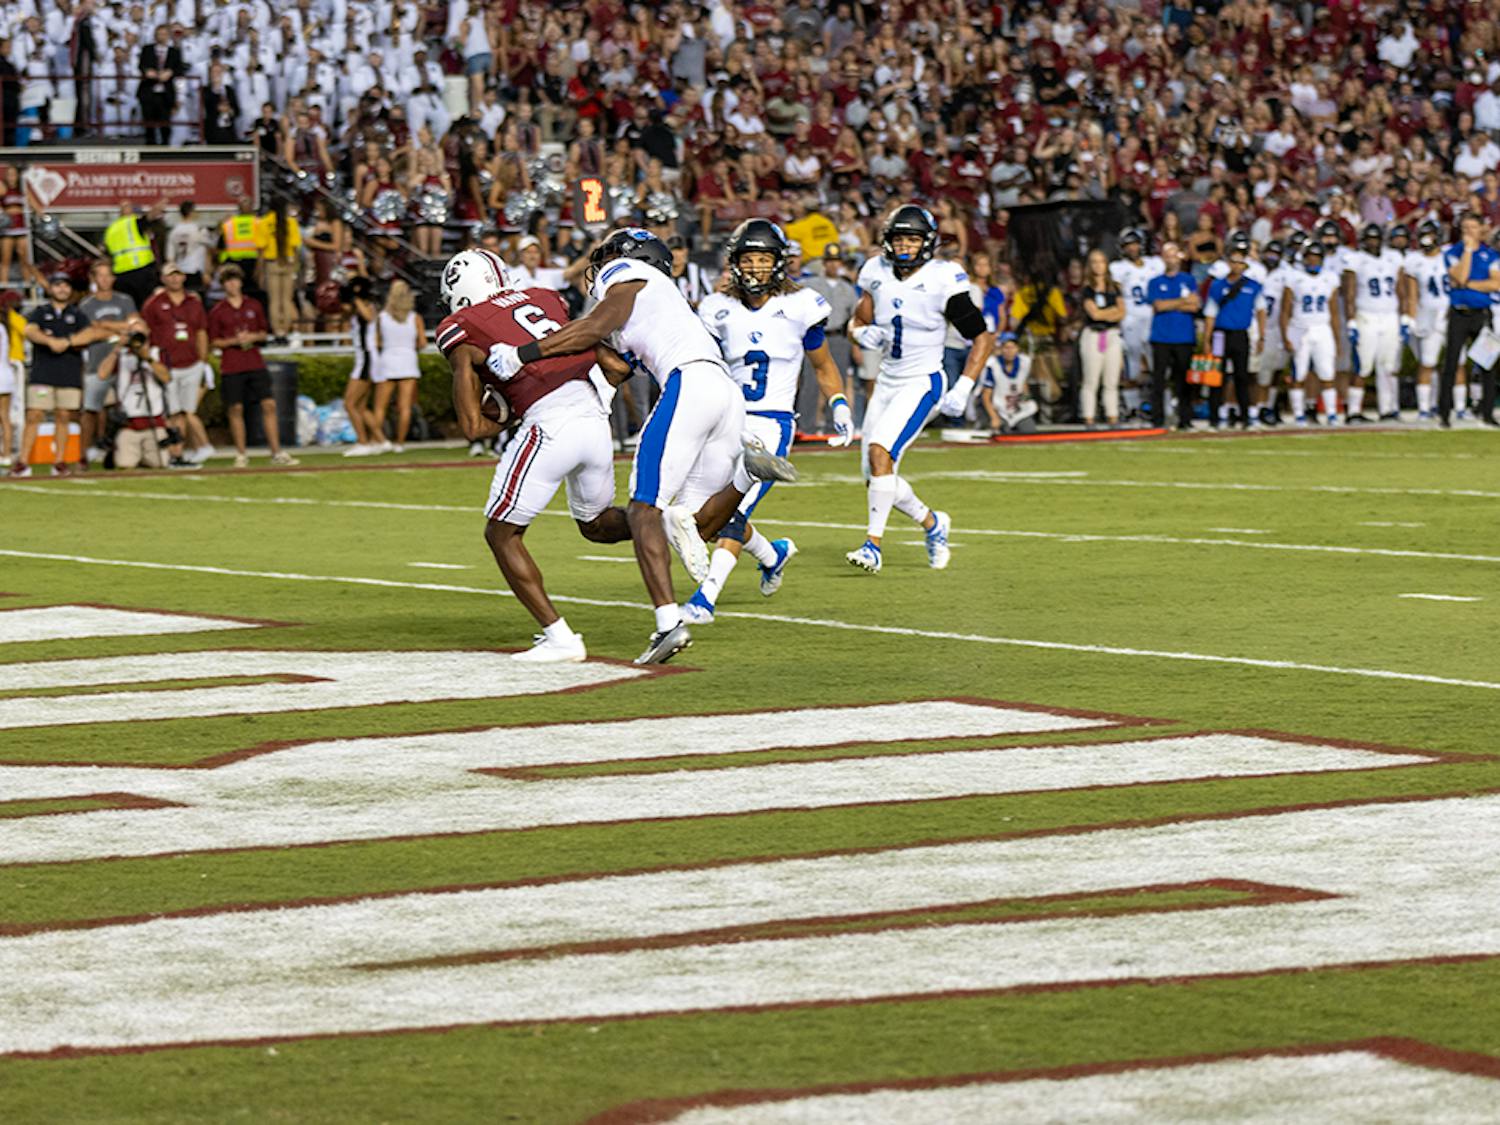 Senior wide receiver Josh Vann steps into the end zone with a 12-yard pass from graduate student quarterback Zeb Noland. This touchdown brought the Gamecocks to 22 points at the top of the second quarter.